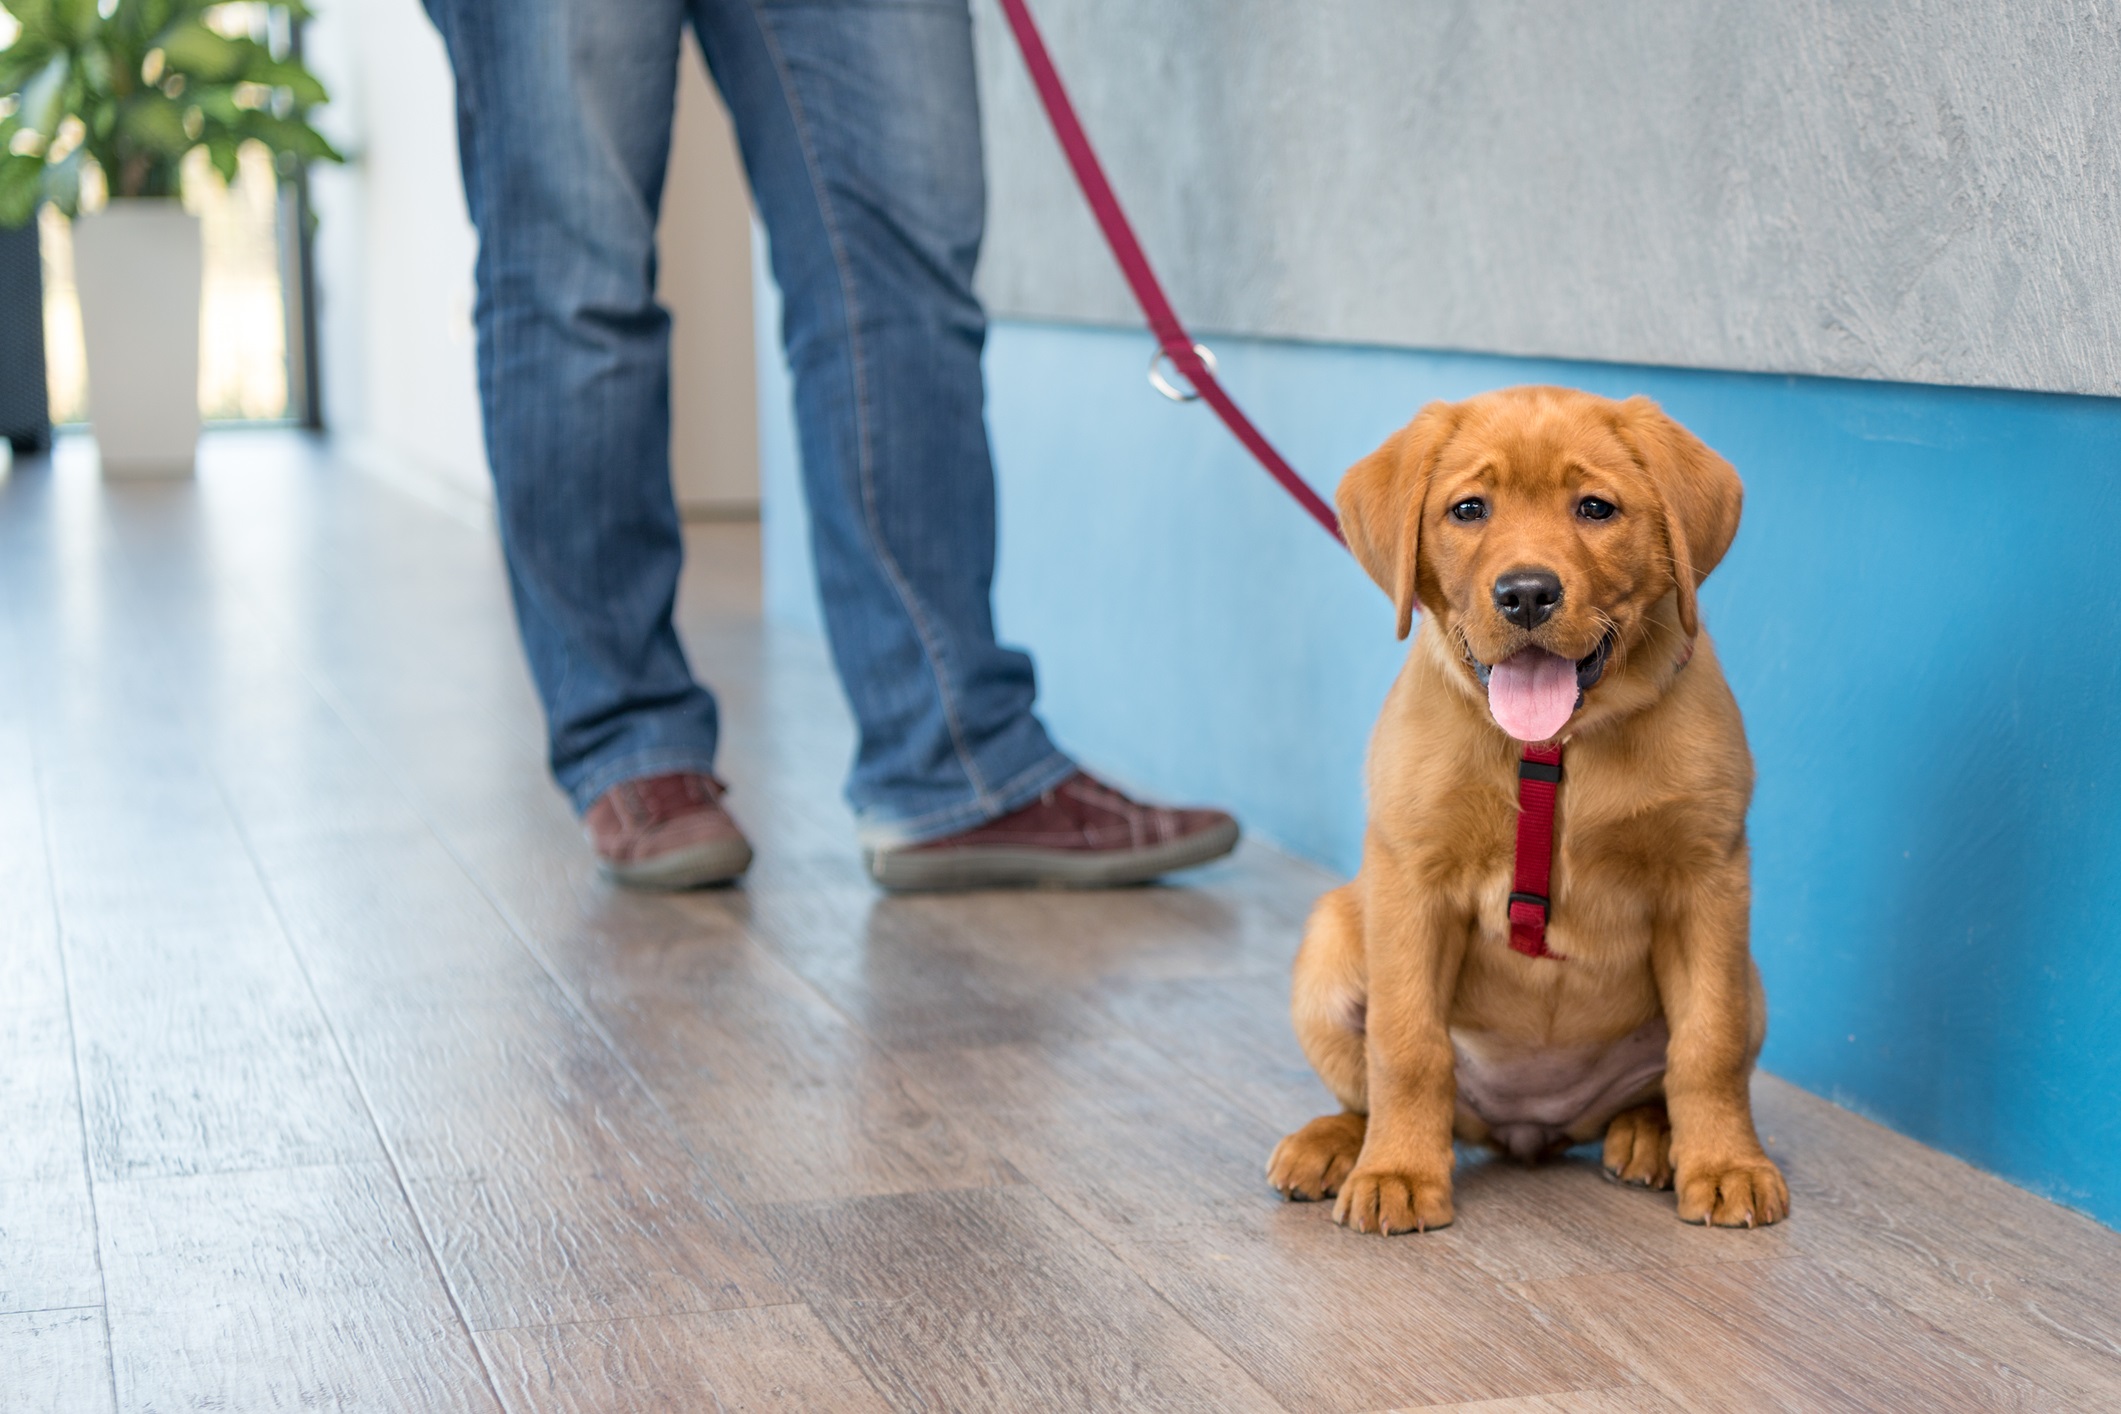 A Labrador puppy on a red leash and his owner check in at a pet resort for check-in when boarding your dog blog.